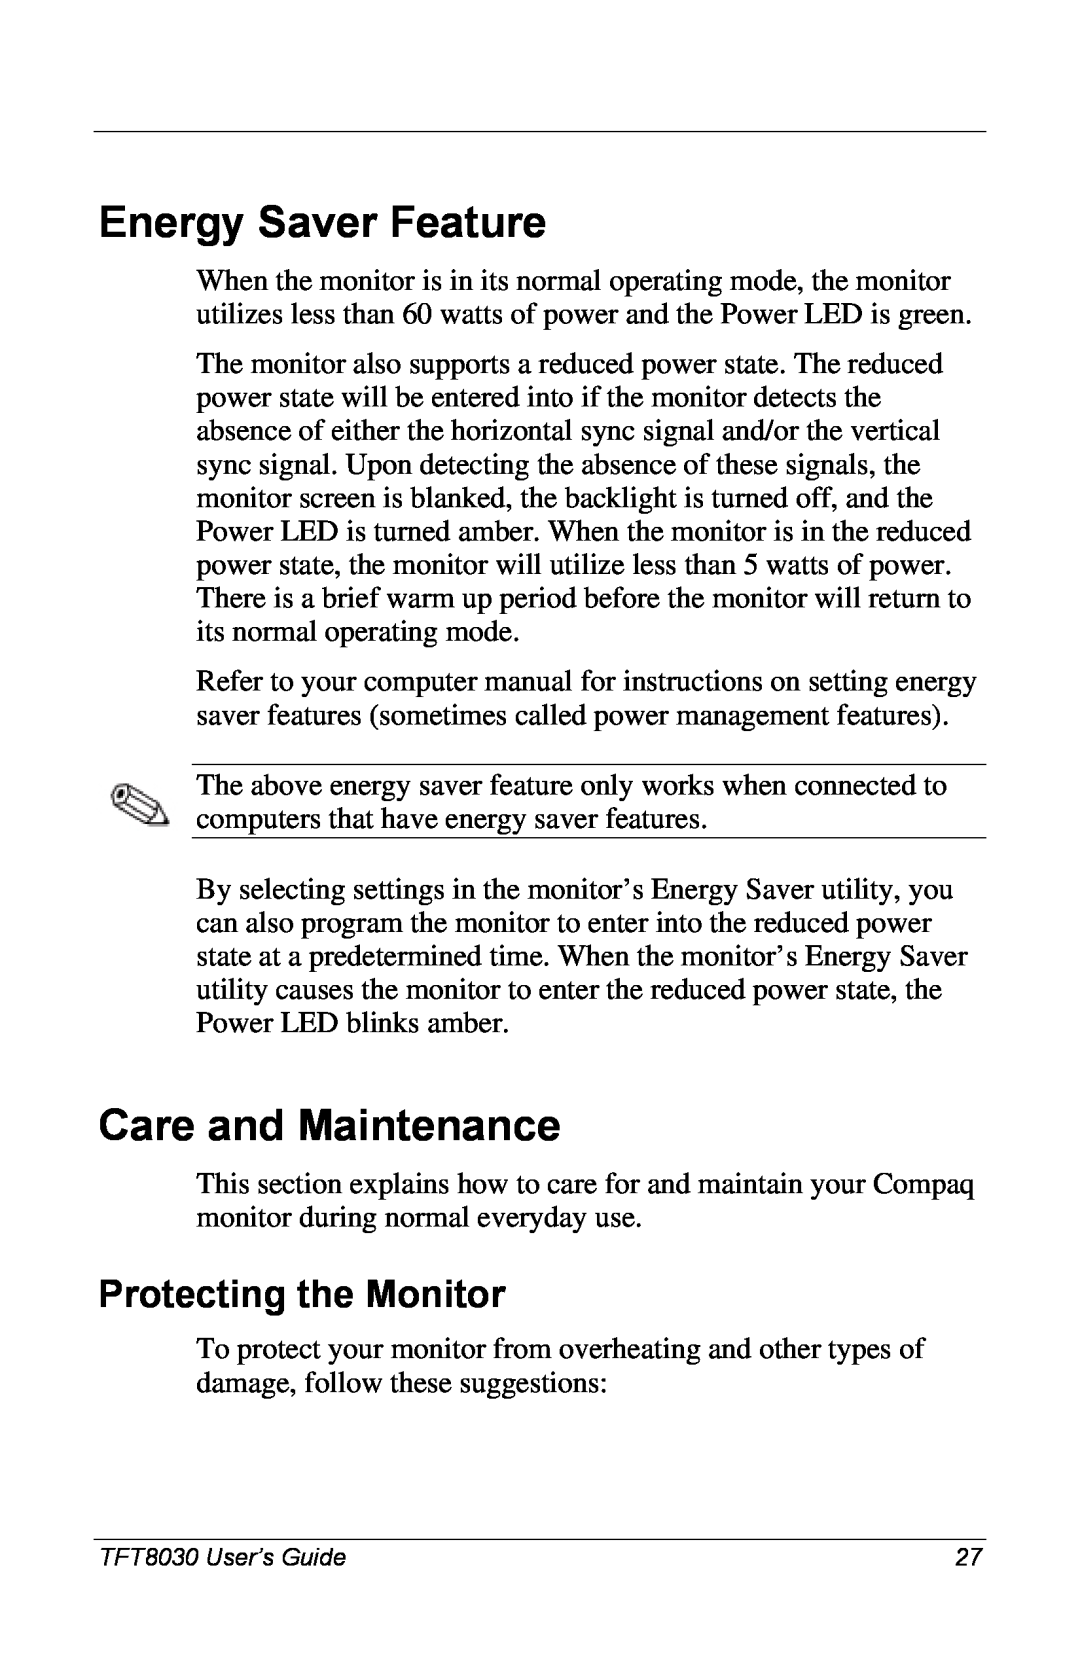 Compaq 8030 manual Energy Saver Feature, Care and Maintenance, Protecting the Monitor 